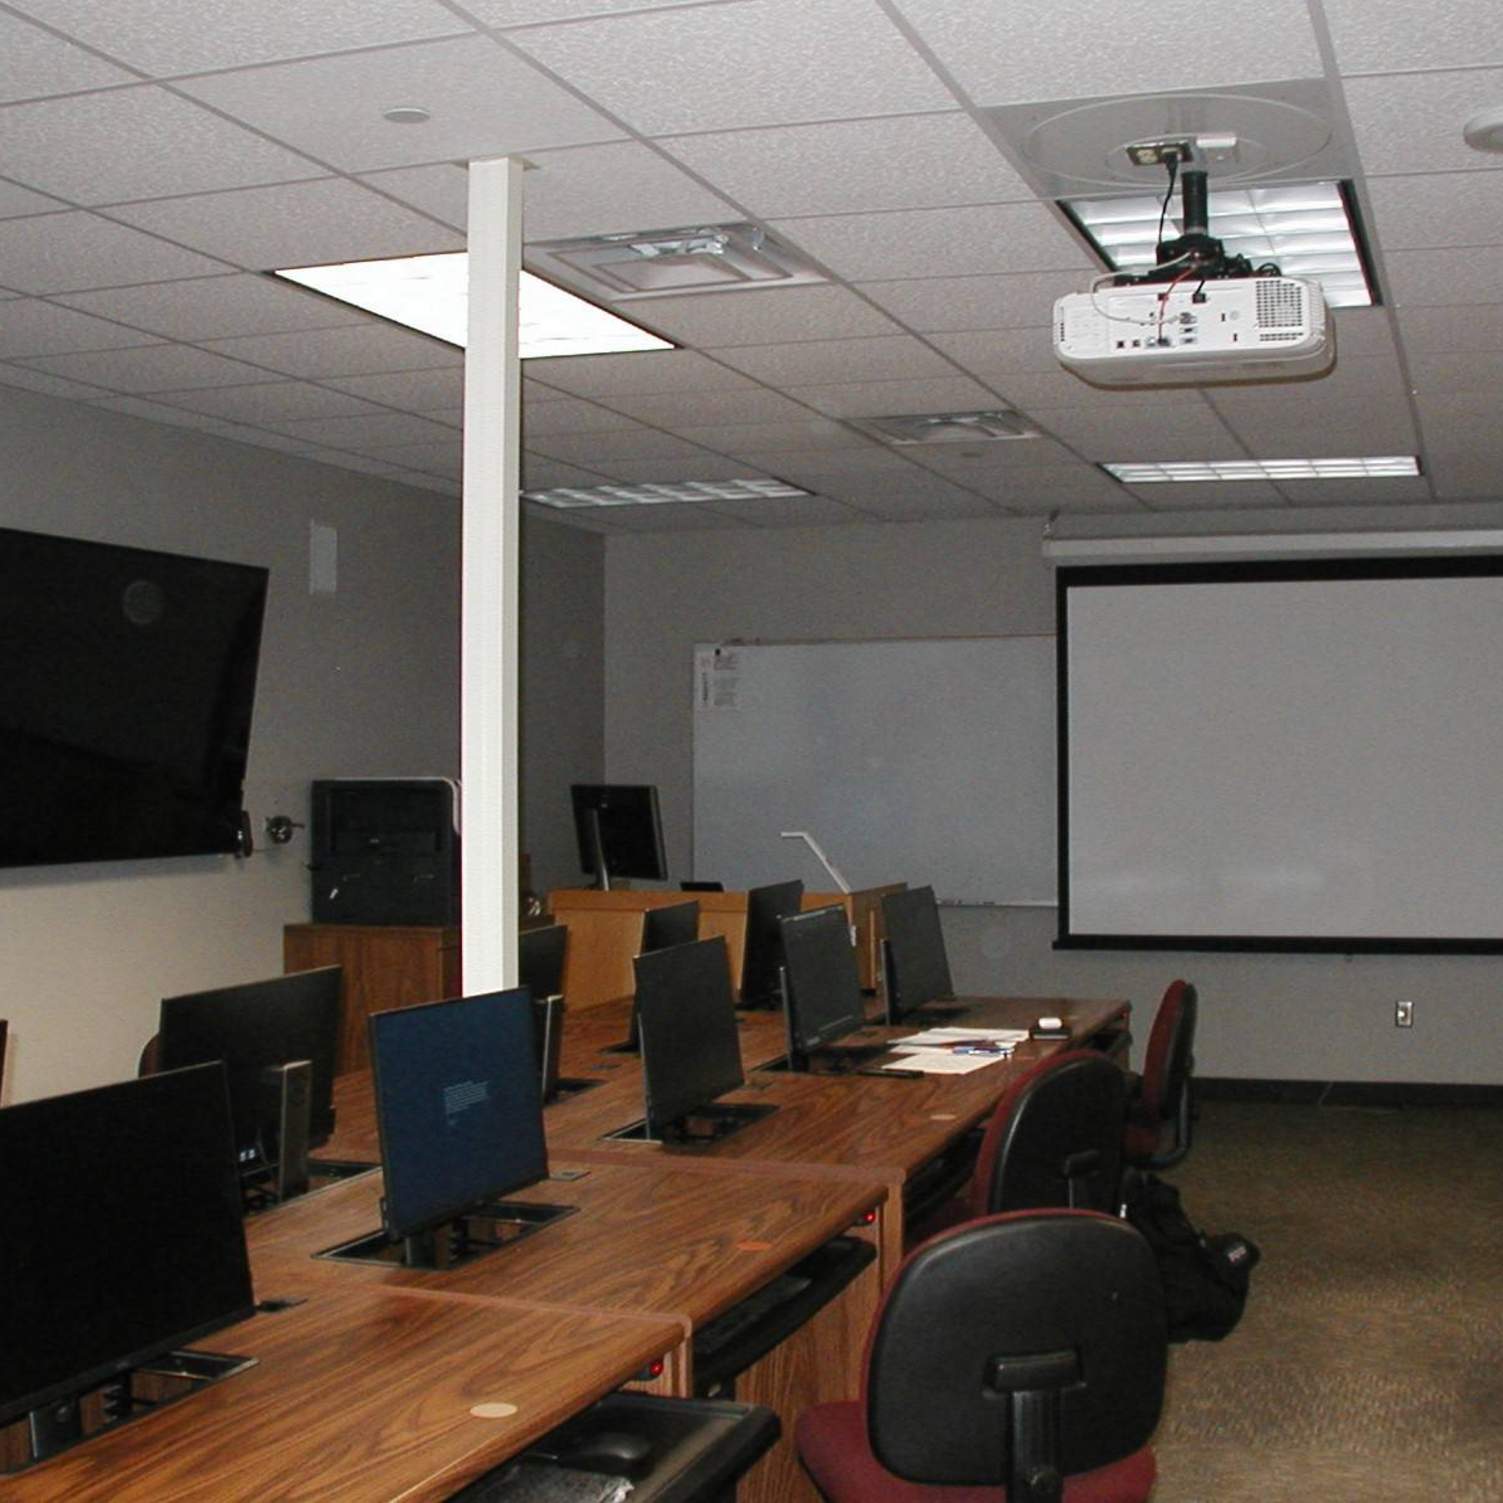 Front of classroom with projector screen.